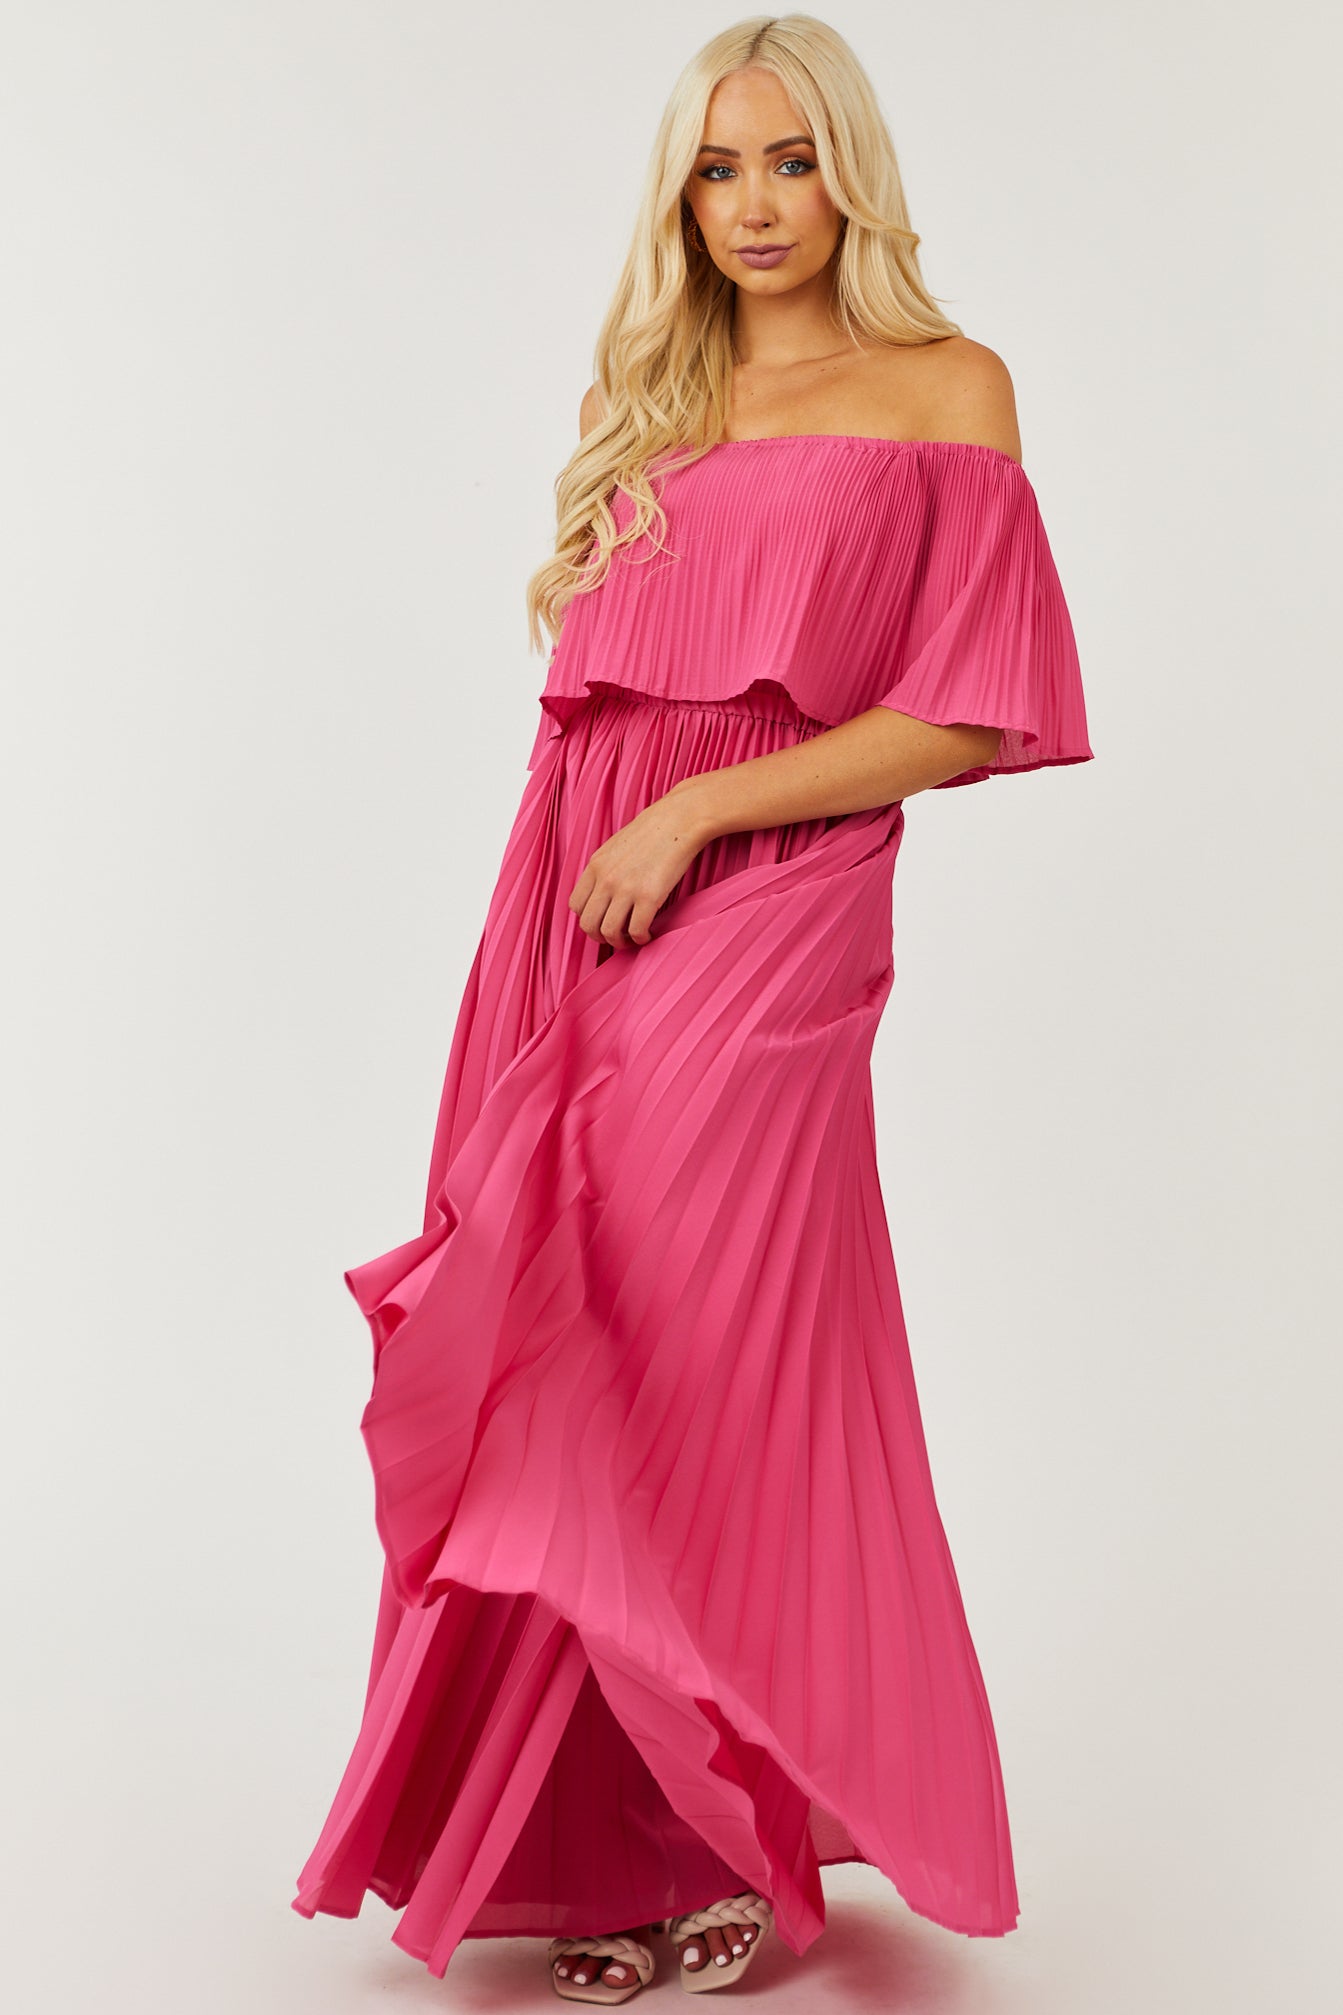 pink pleated dress